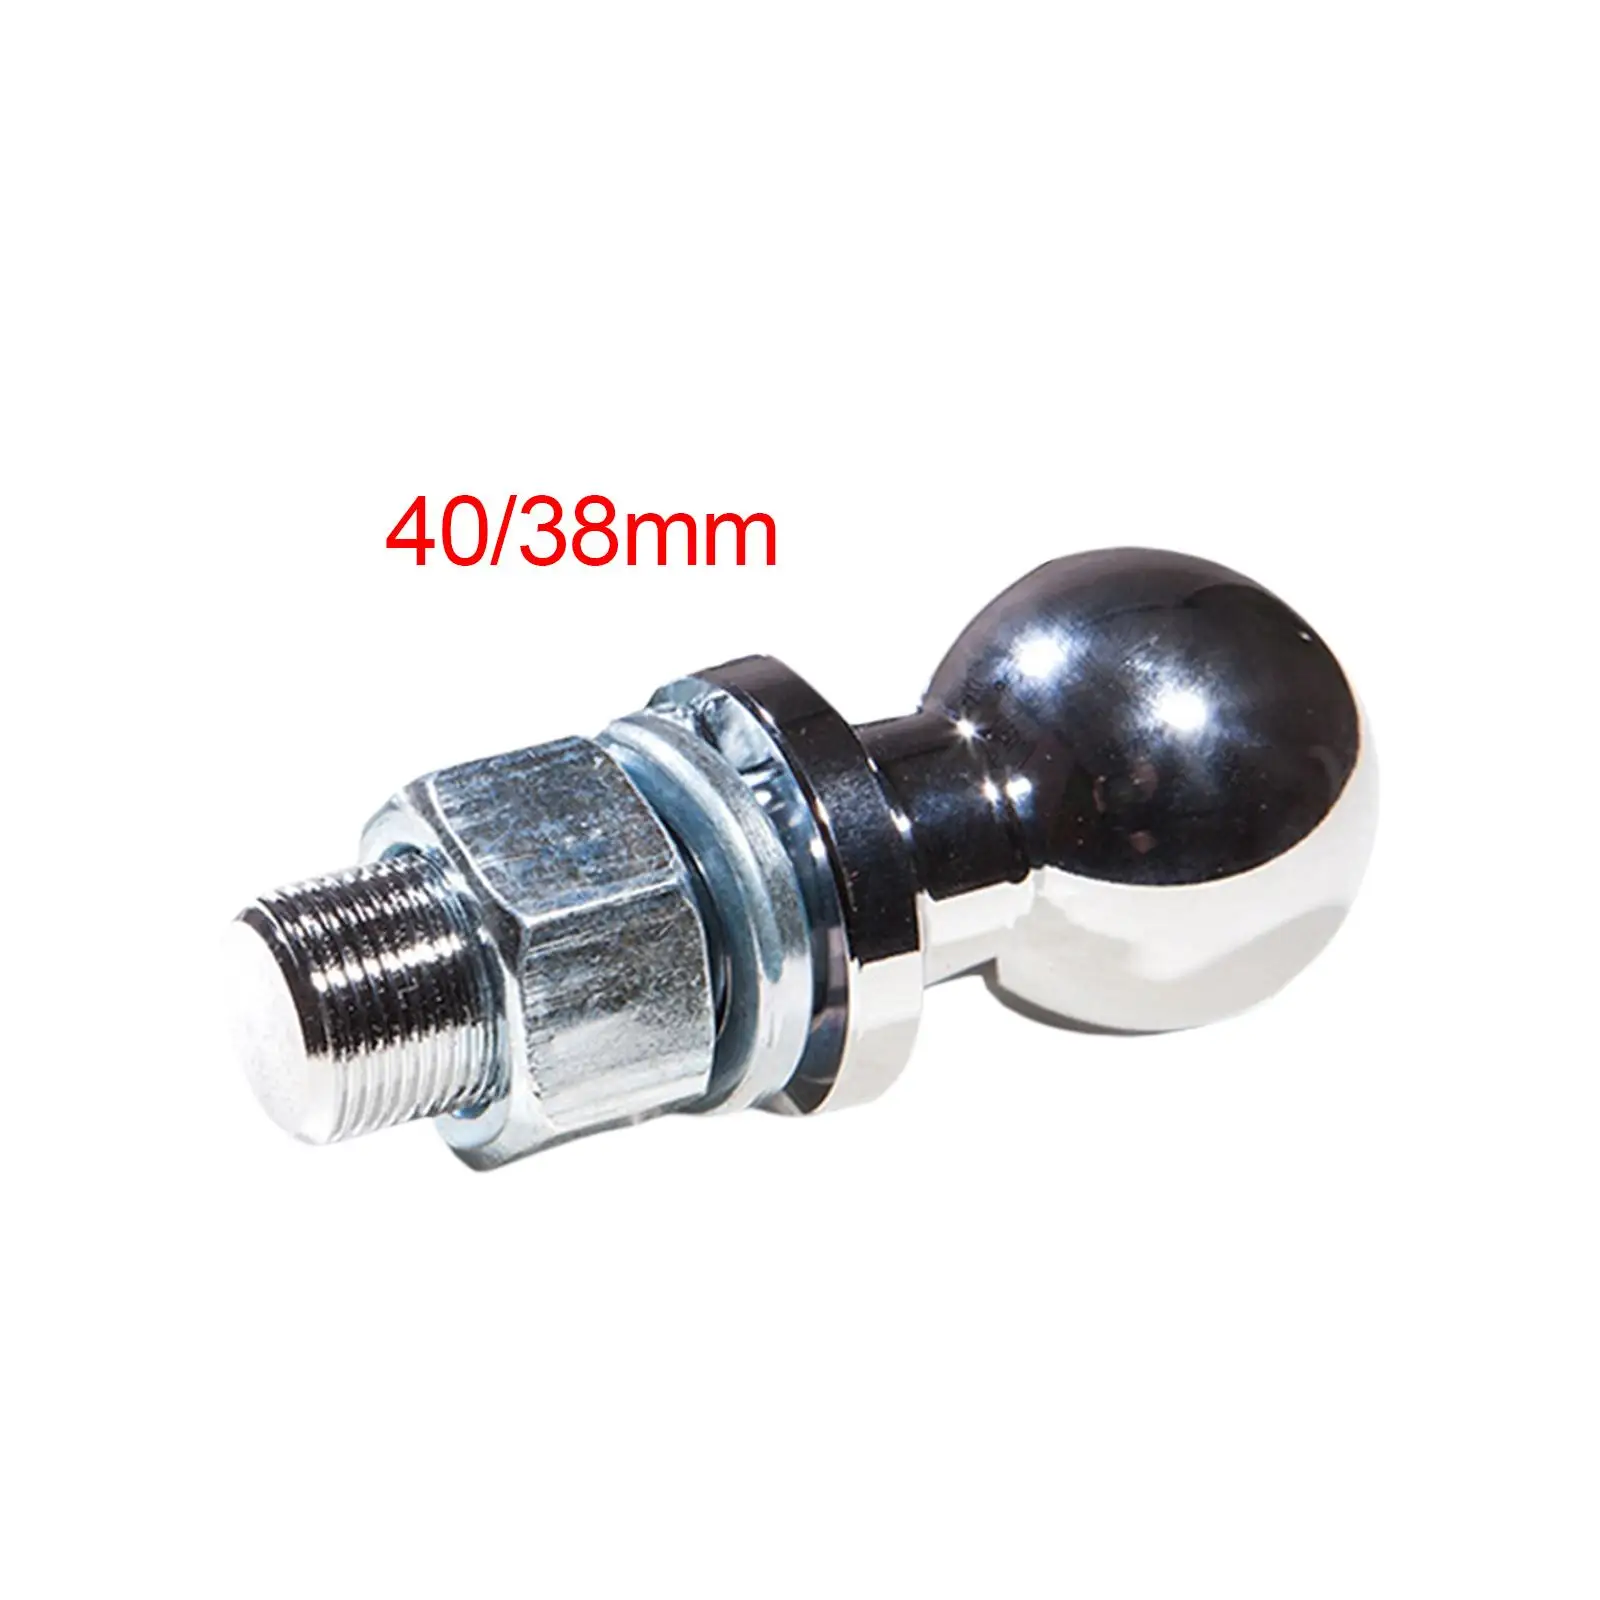 Trailer Connector Ball Head 2 inch Durable Professional Portable for RV